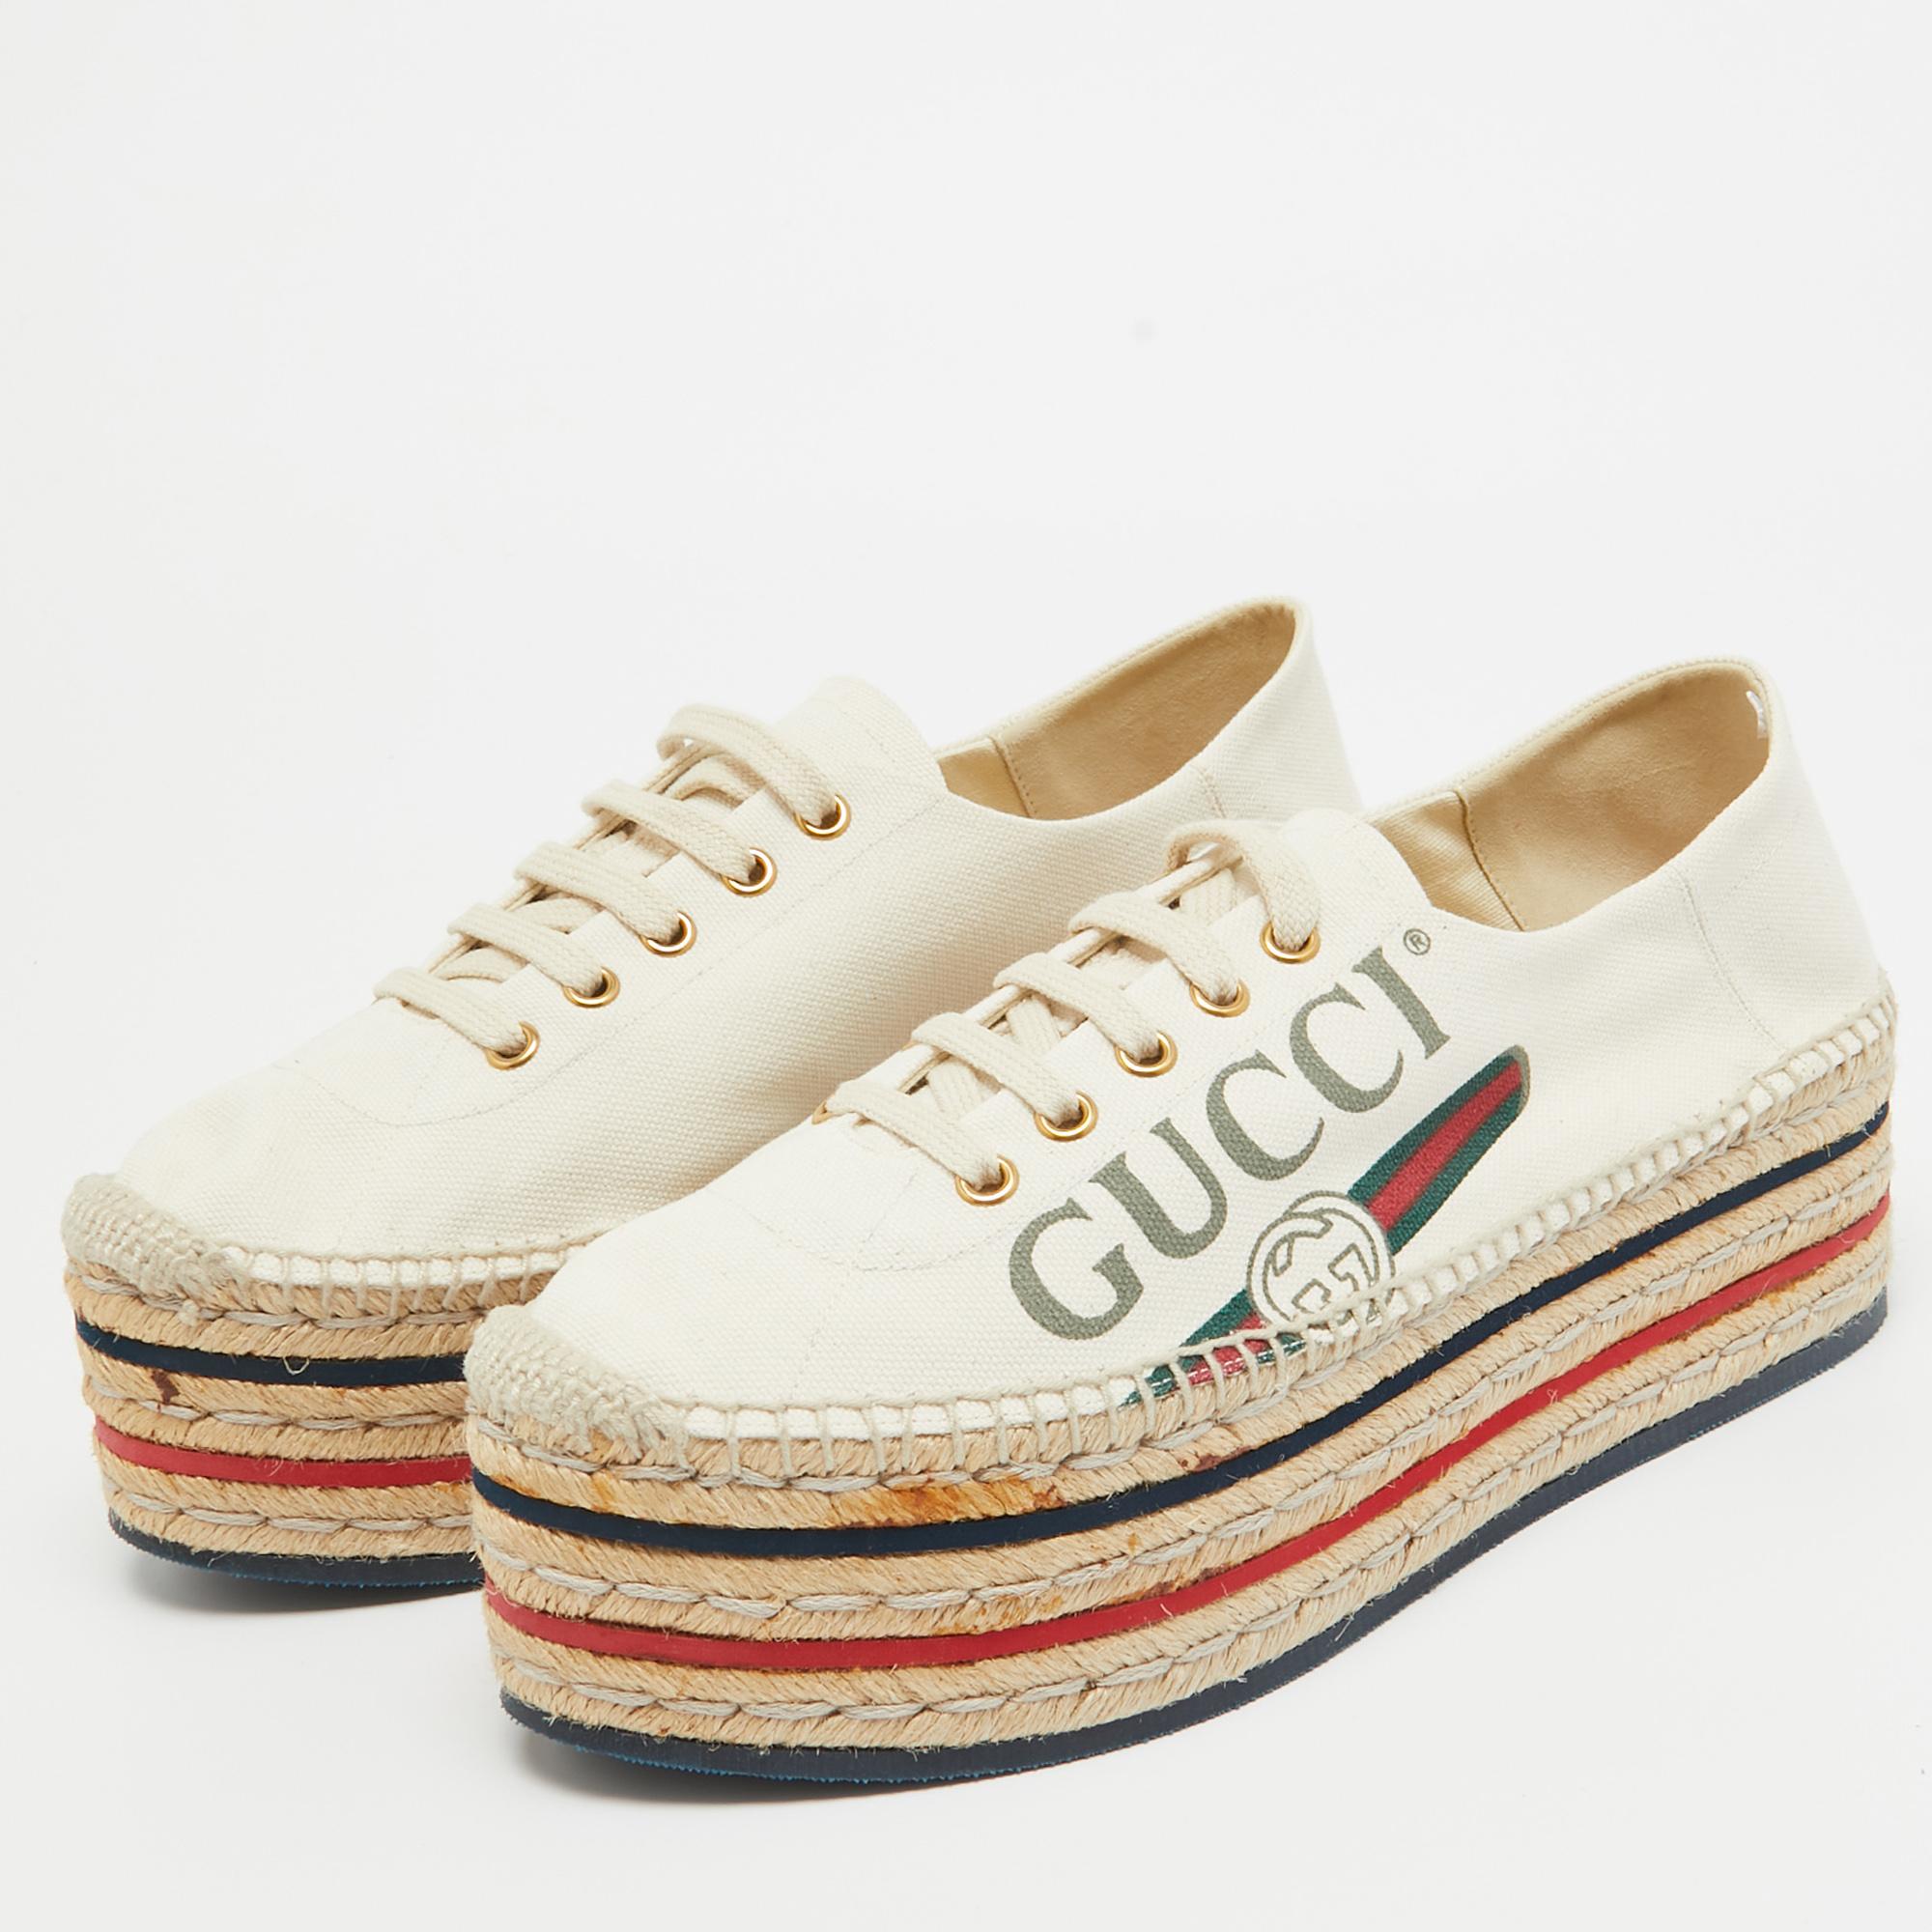 Gucci Off White Canvas logo Lilibeth Espadrille Sneakers Size 39 For Sale 4